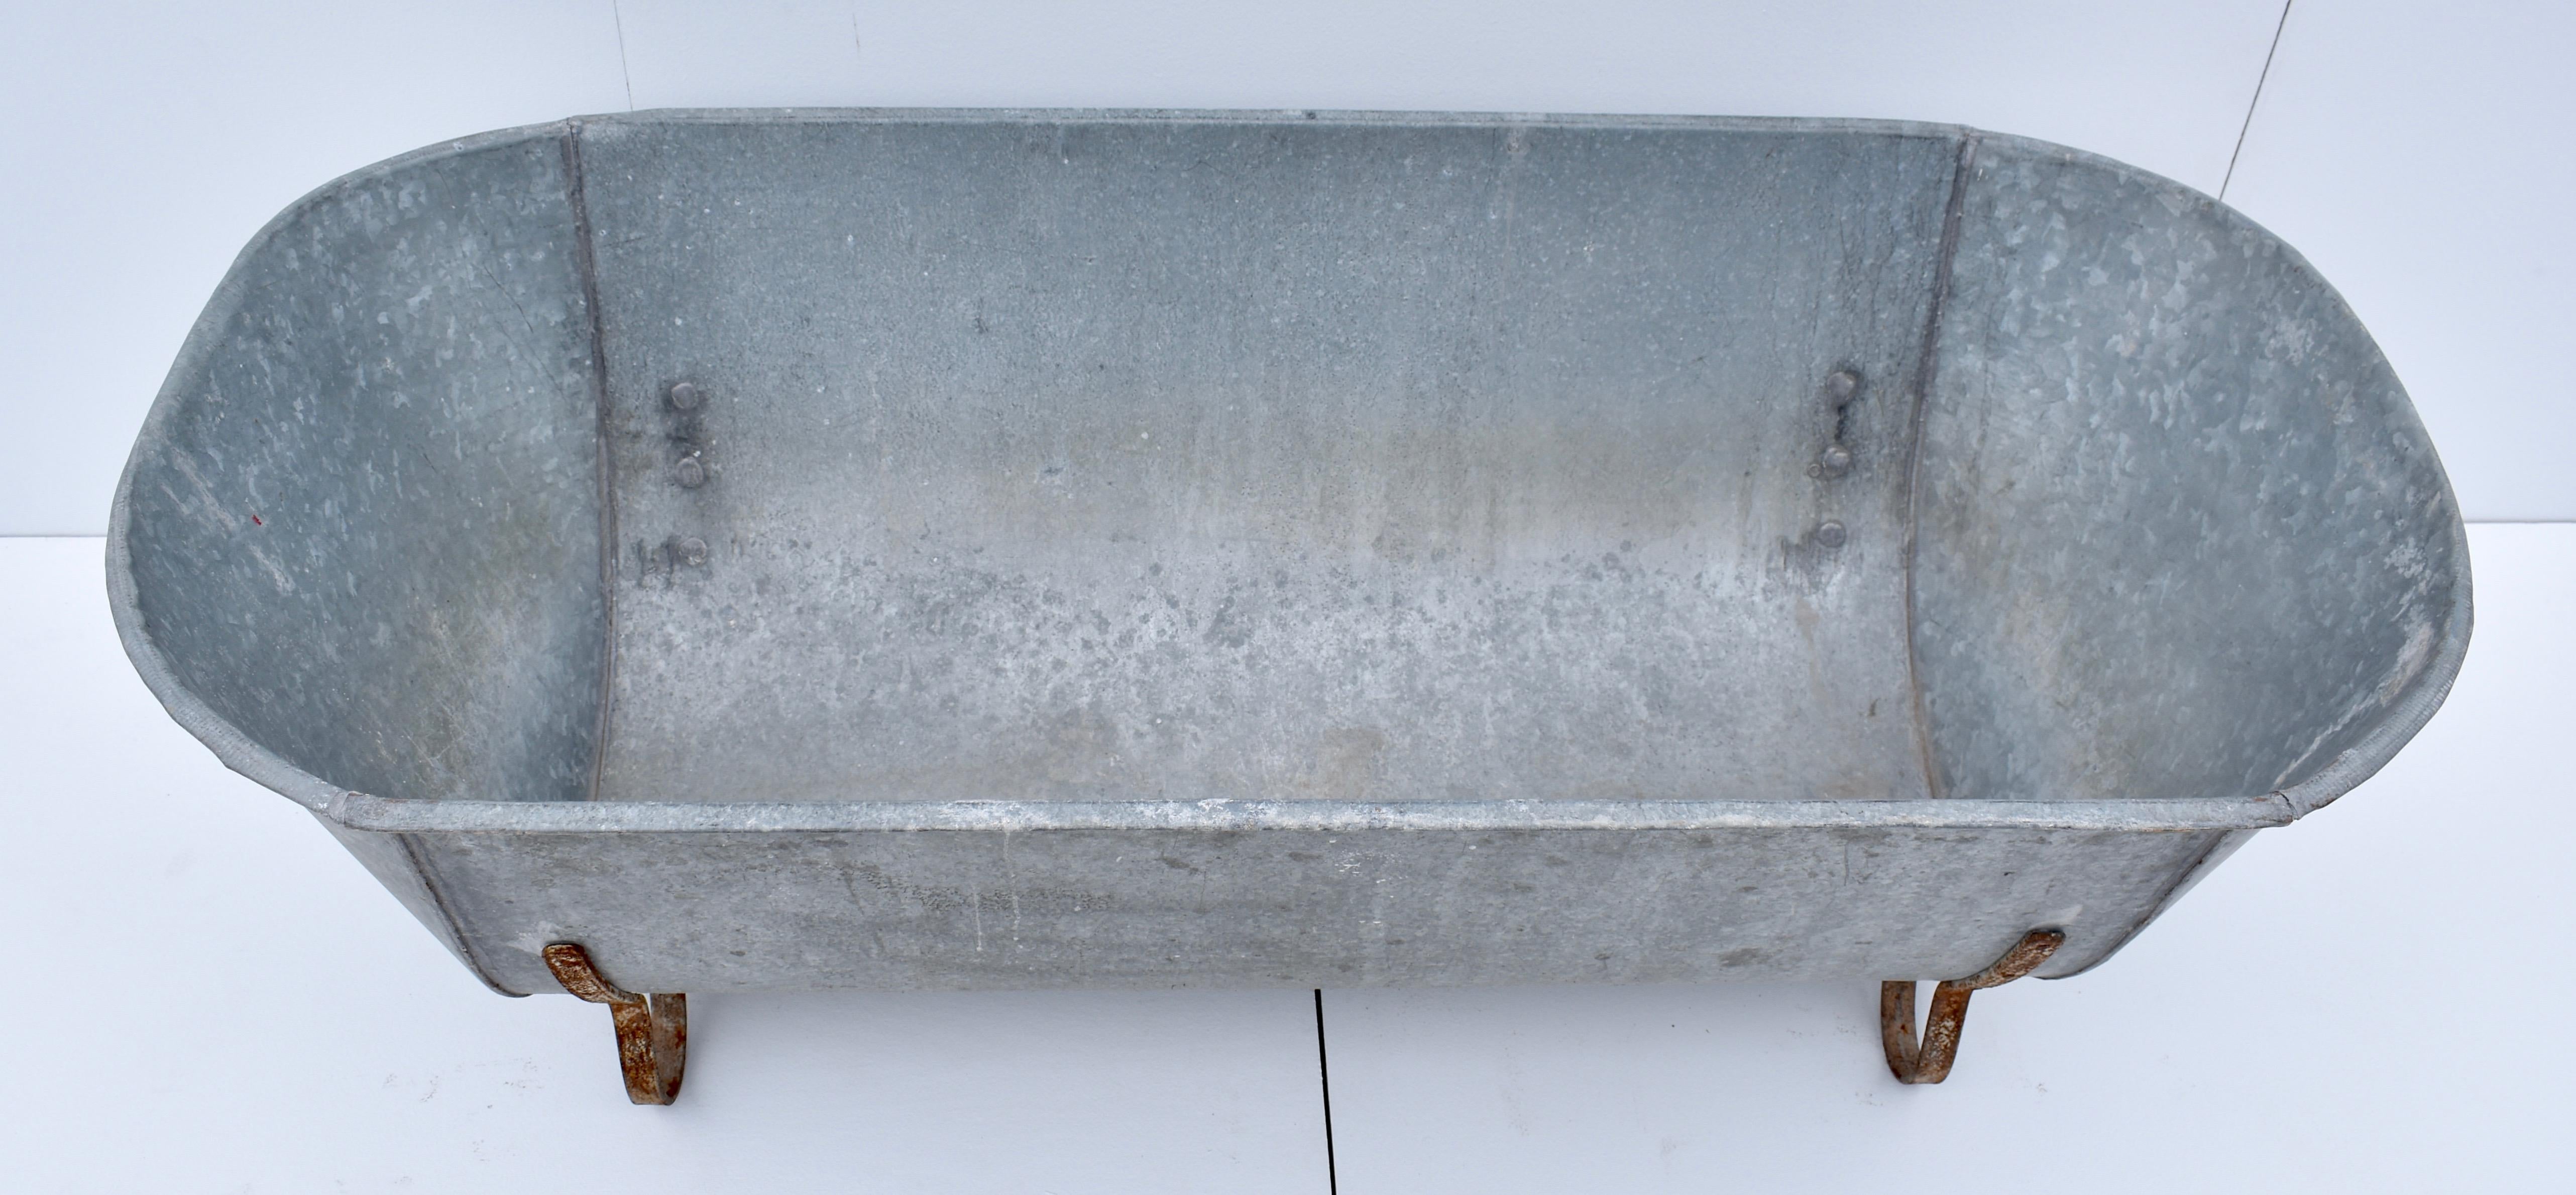 This is a vintage Central European zinc bathtub with attractive curled iron feet. There is no drain hole, but a retrofit may be possible. In good watertight condition.